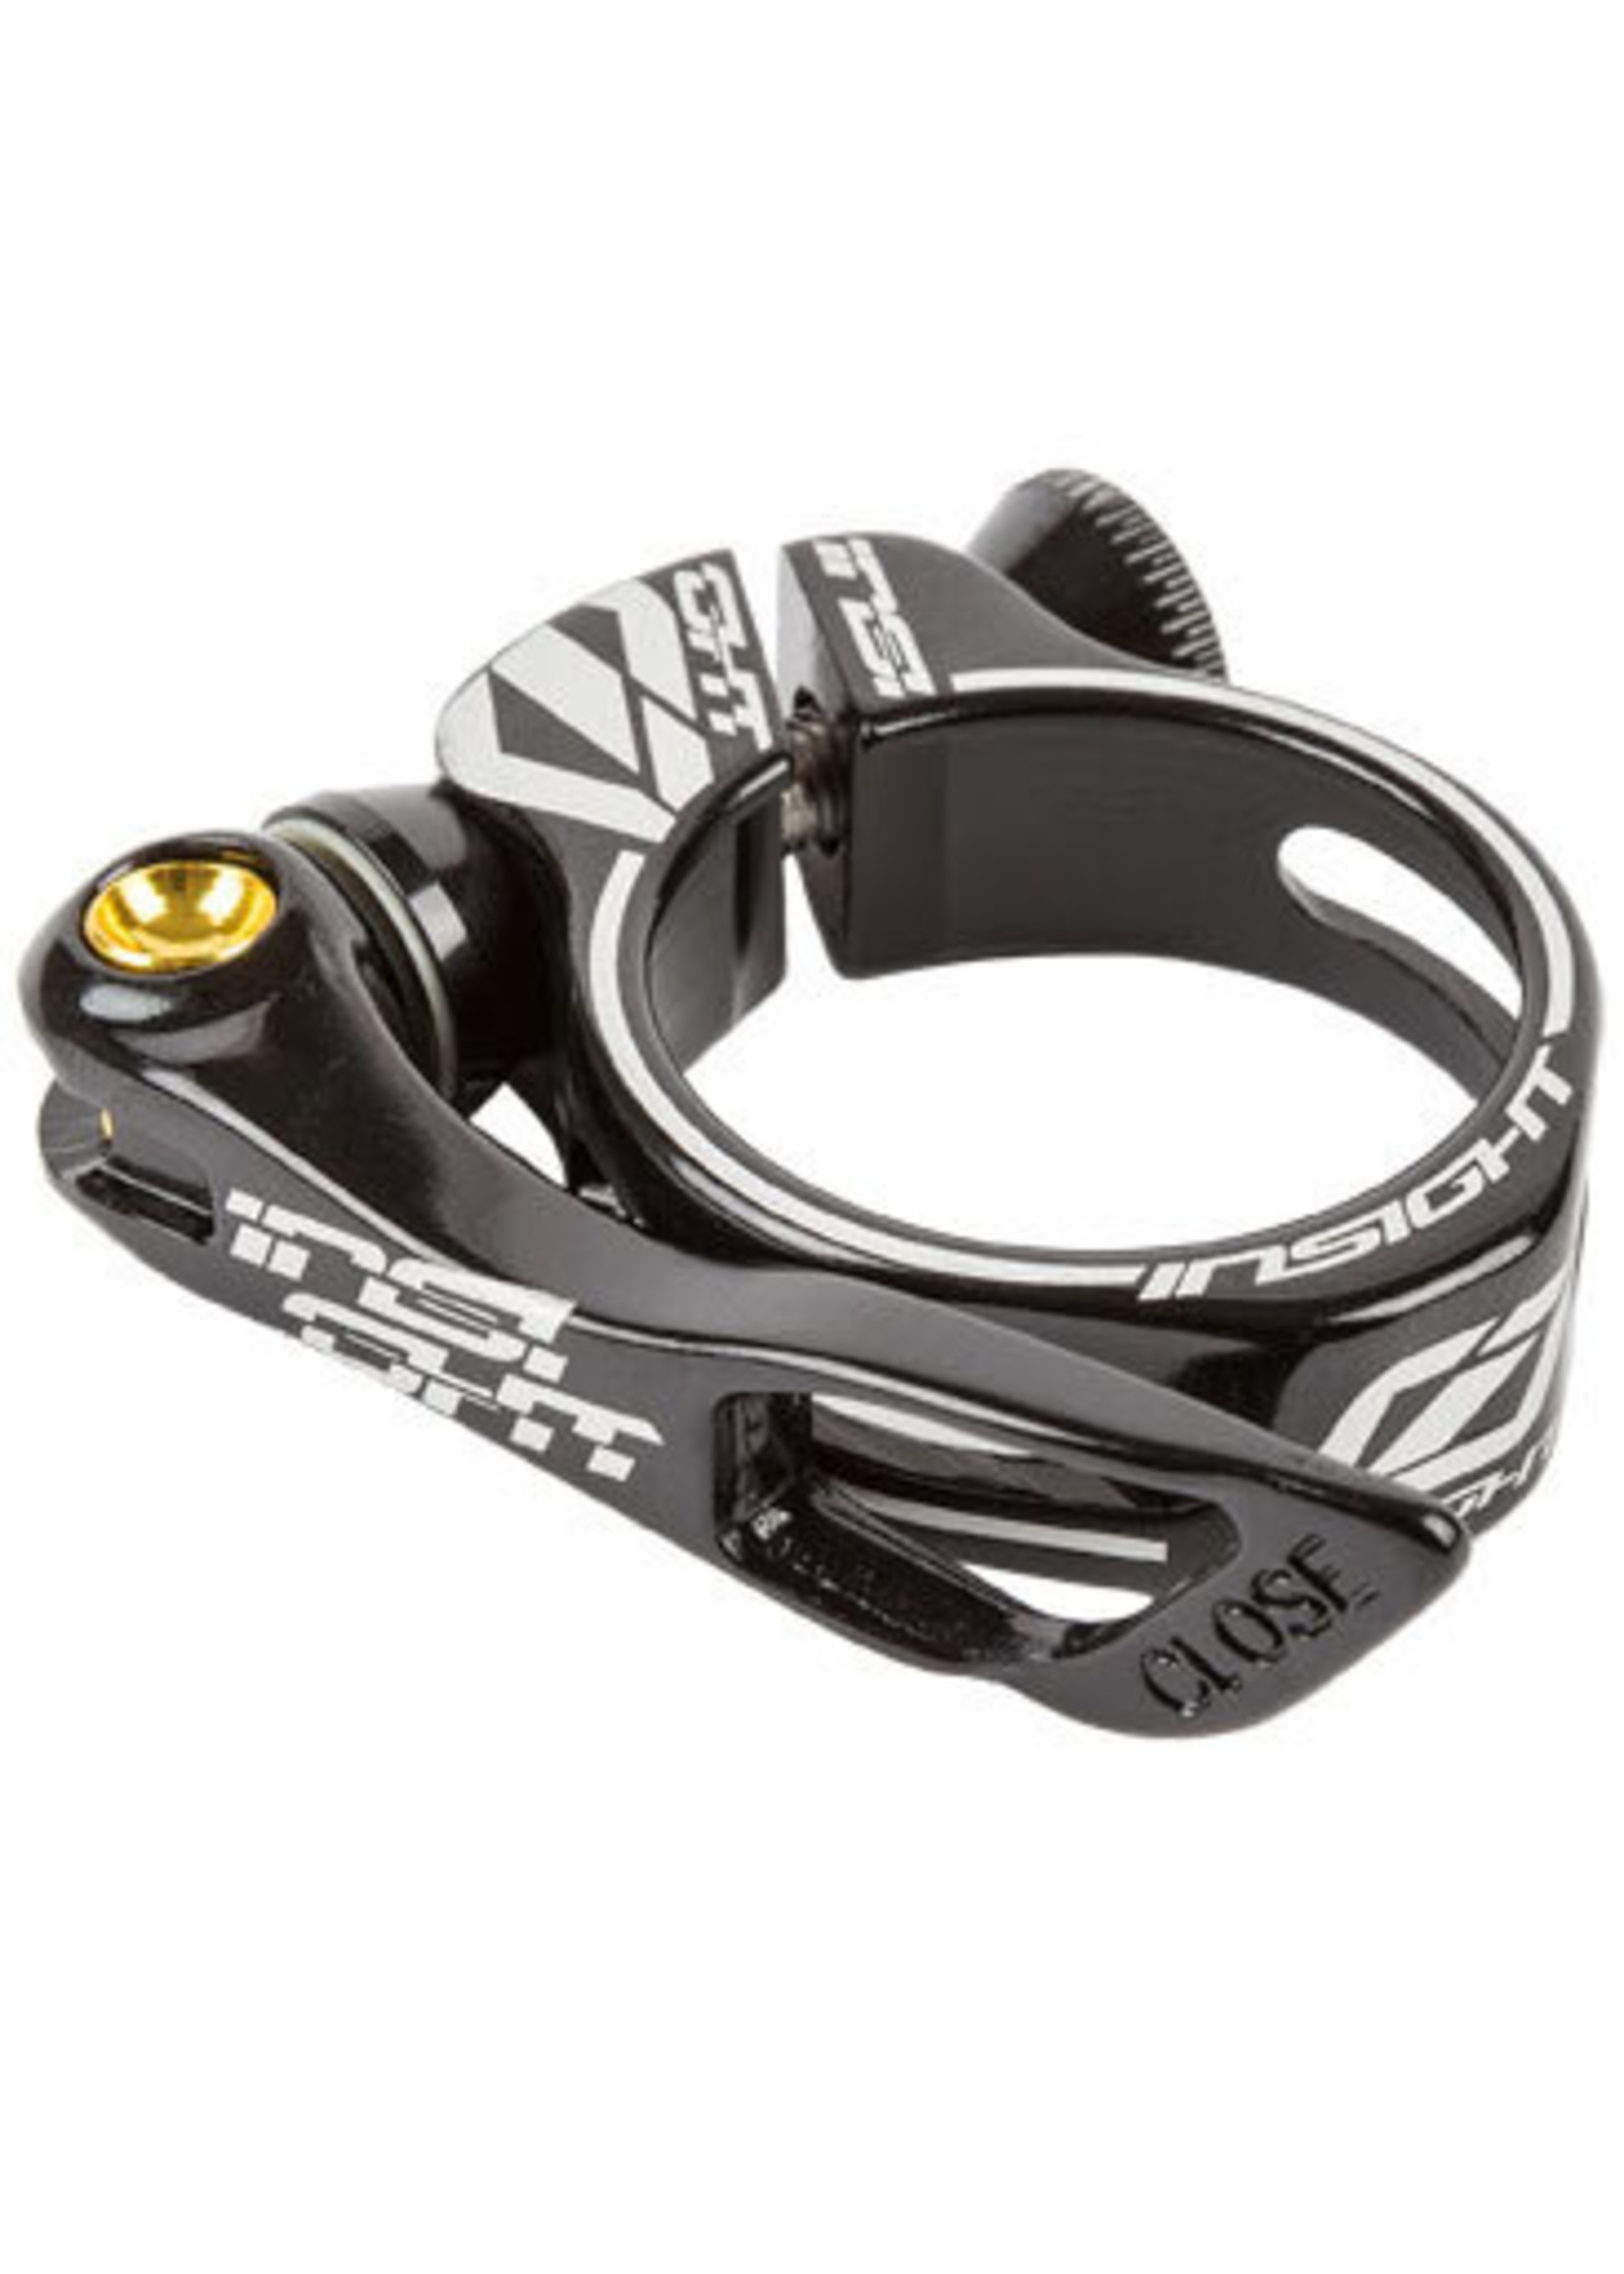 Insight Seat Clamp Insight Quick Release Black 28.6